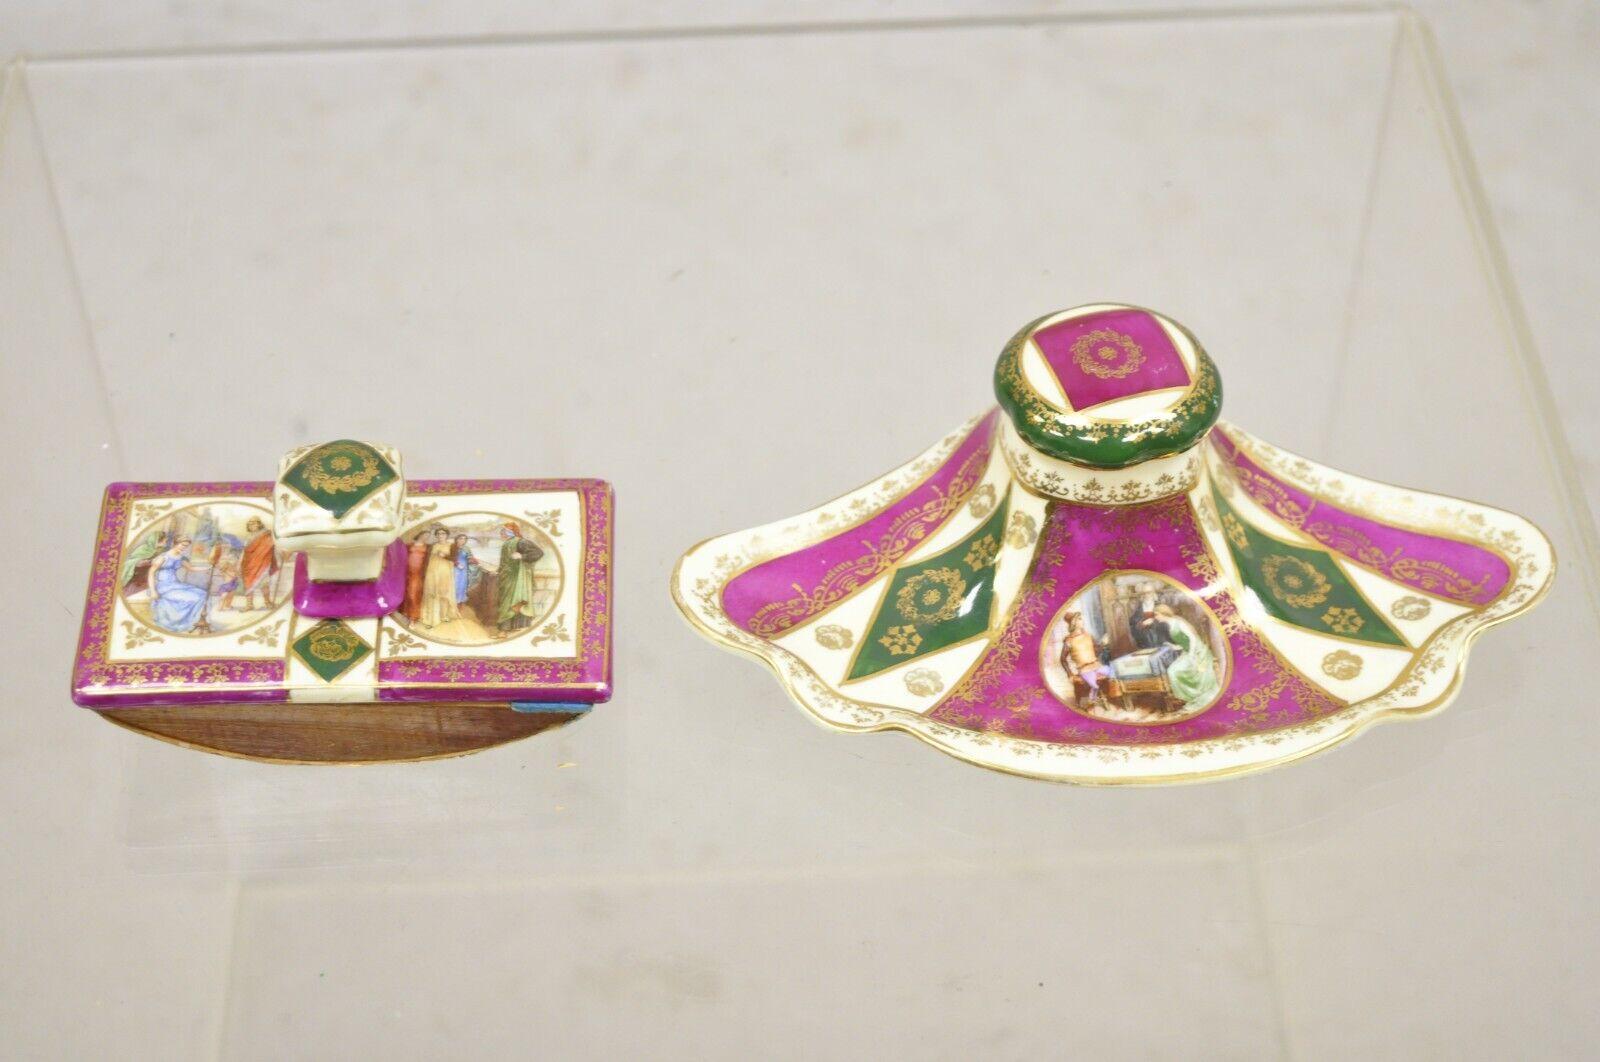 Antique Old Vienna Paris Porcelain Inkwell and Ink Blotter Desk Set -  2 Pc Set. item features Painted scenes, beautiful color, crown mark to inkwell, ver nice antique set. Circa Early 1900s Measurements Inkwell: 2.25